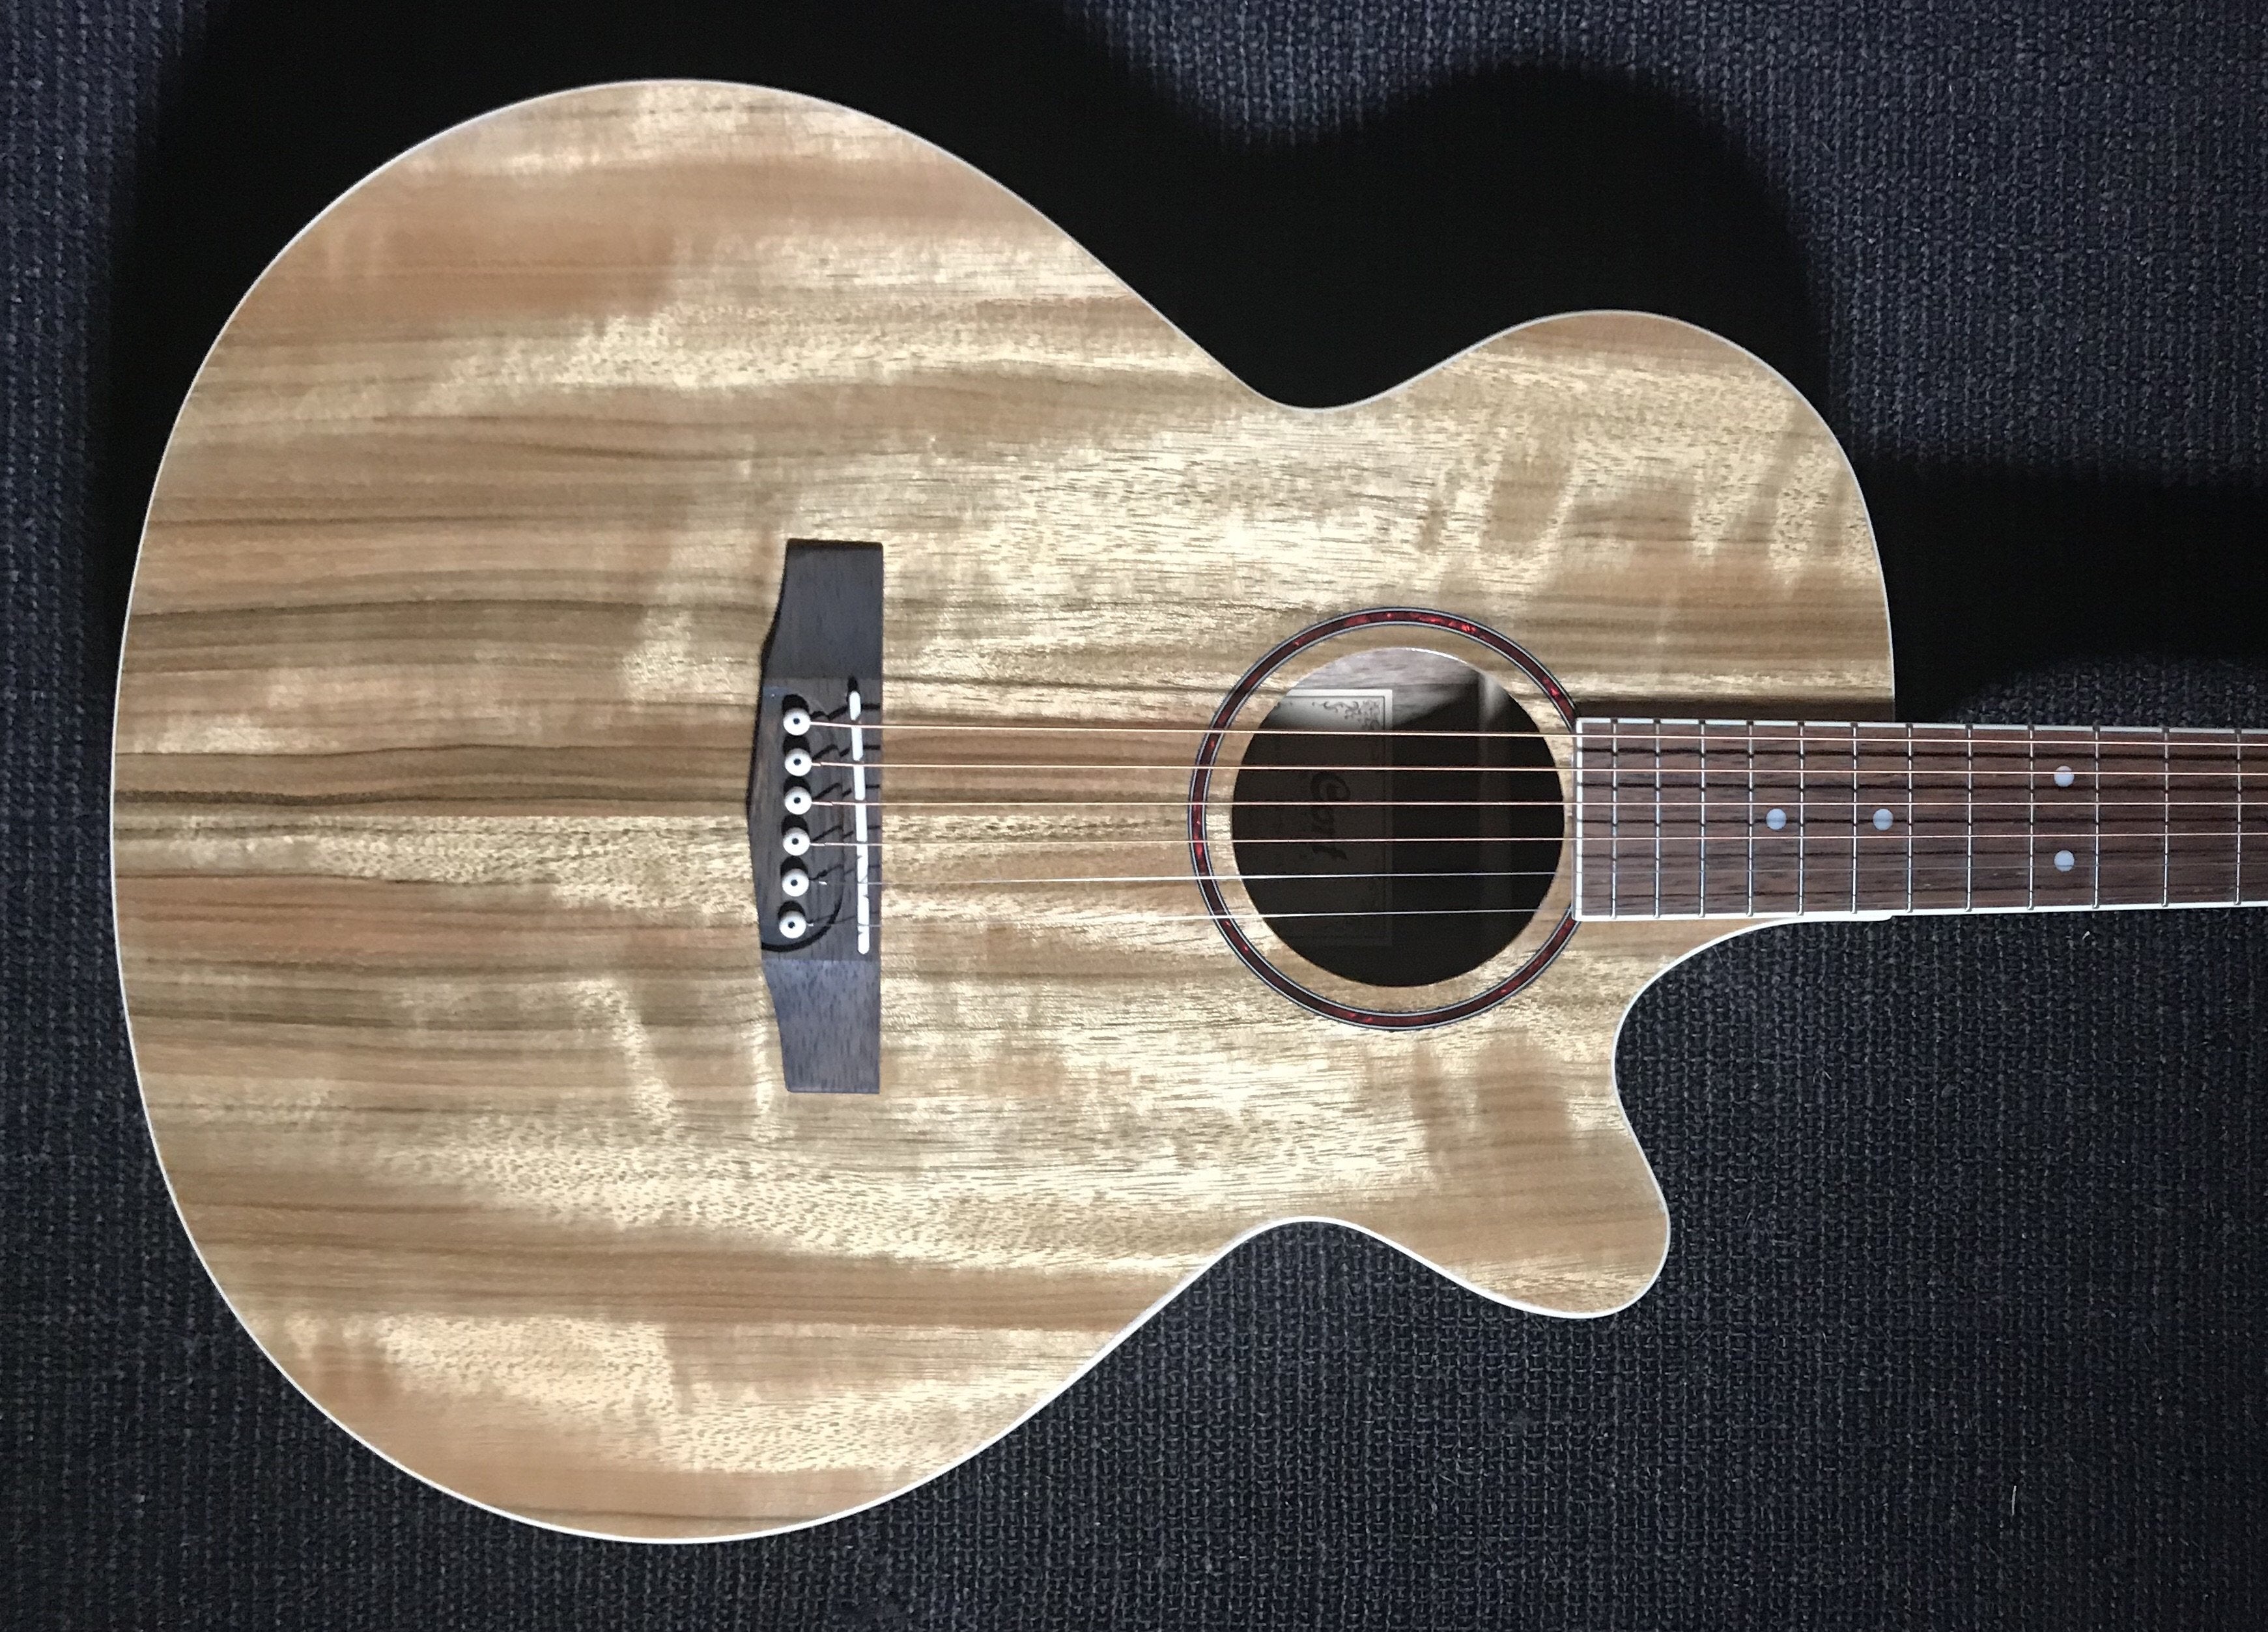 Cort SFX DAO, Electro Acoustic Guitar for sale at Richards Guitars.